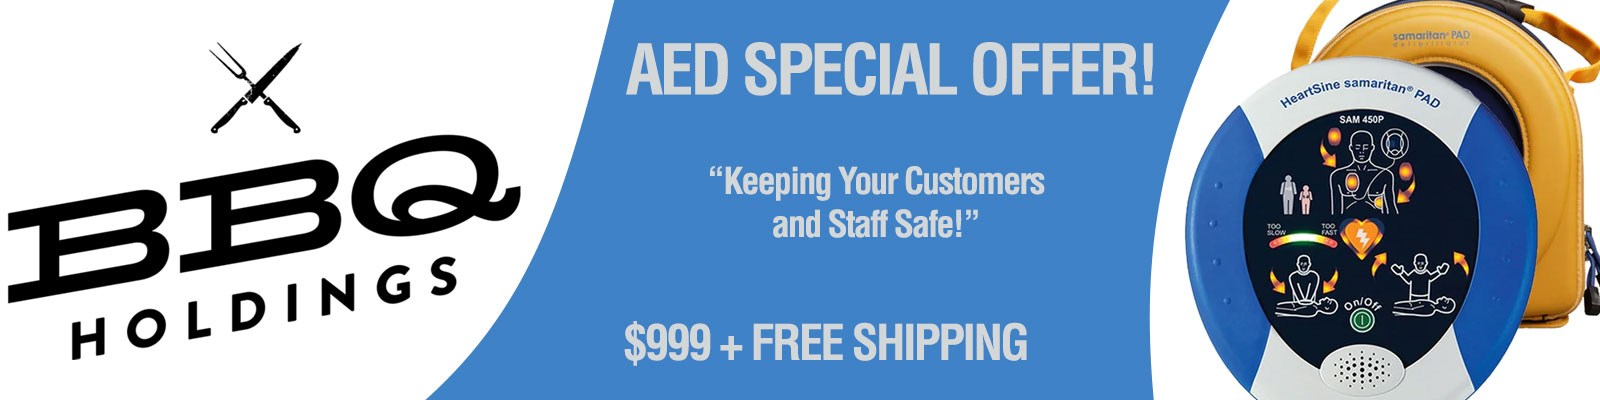 BBQ Holdings AED promo